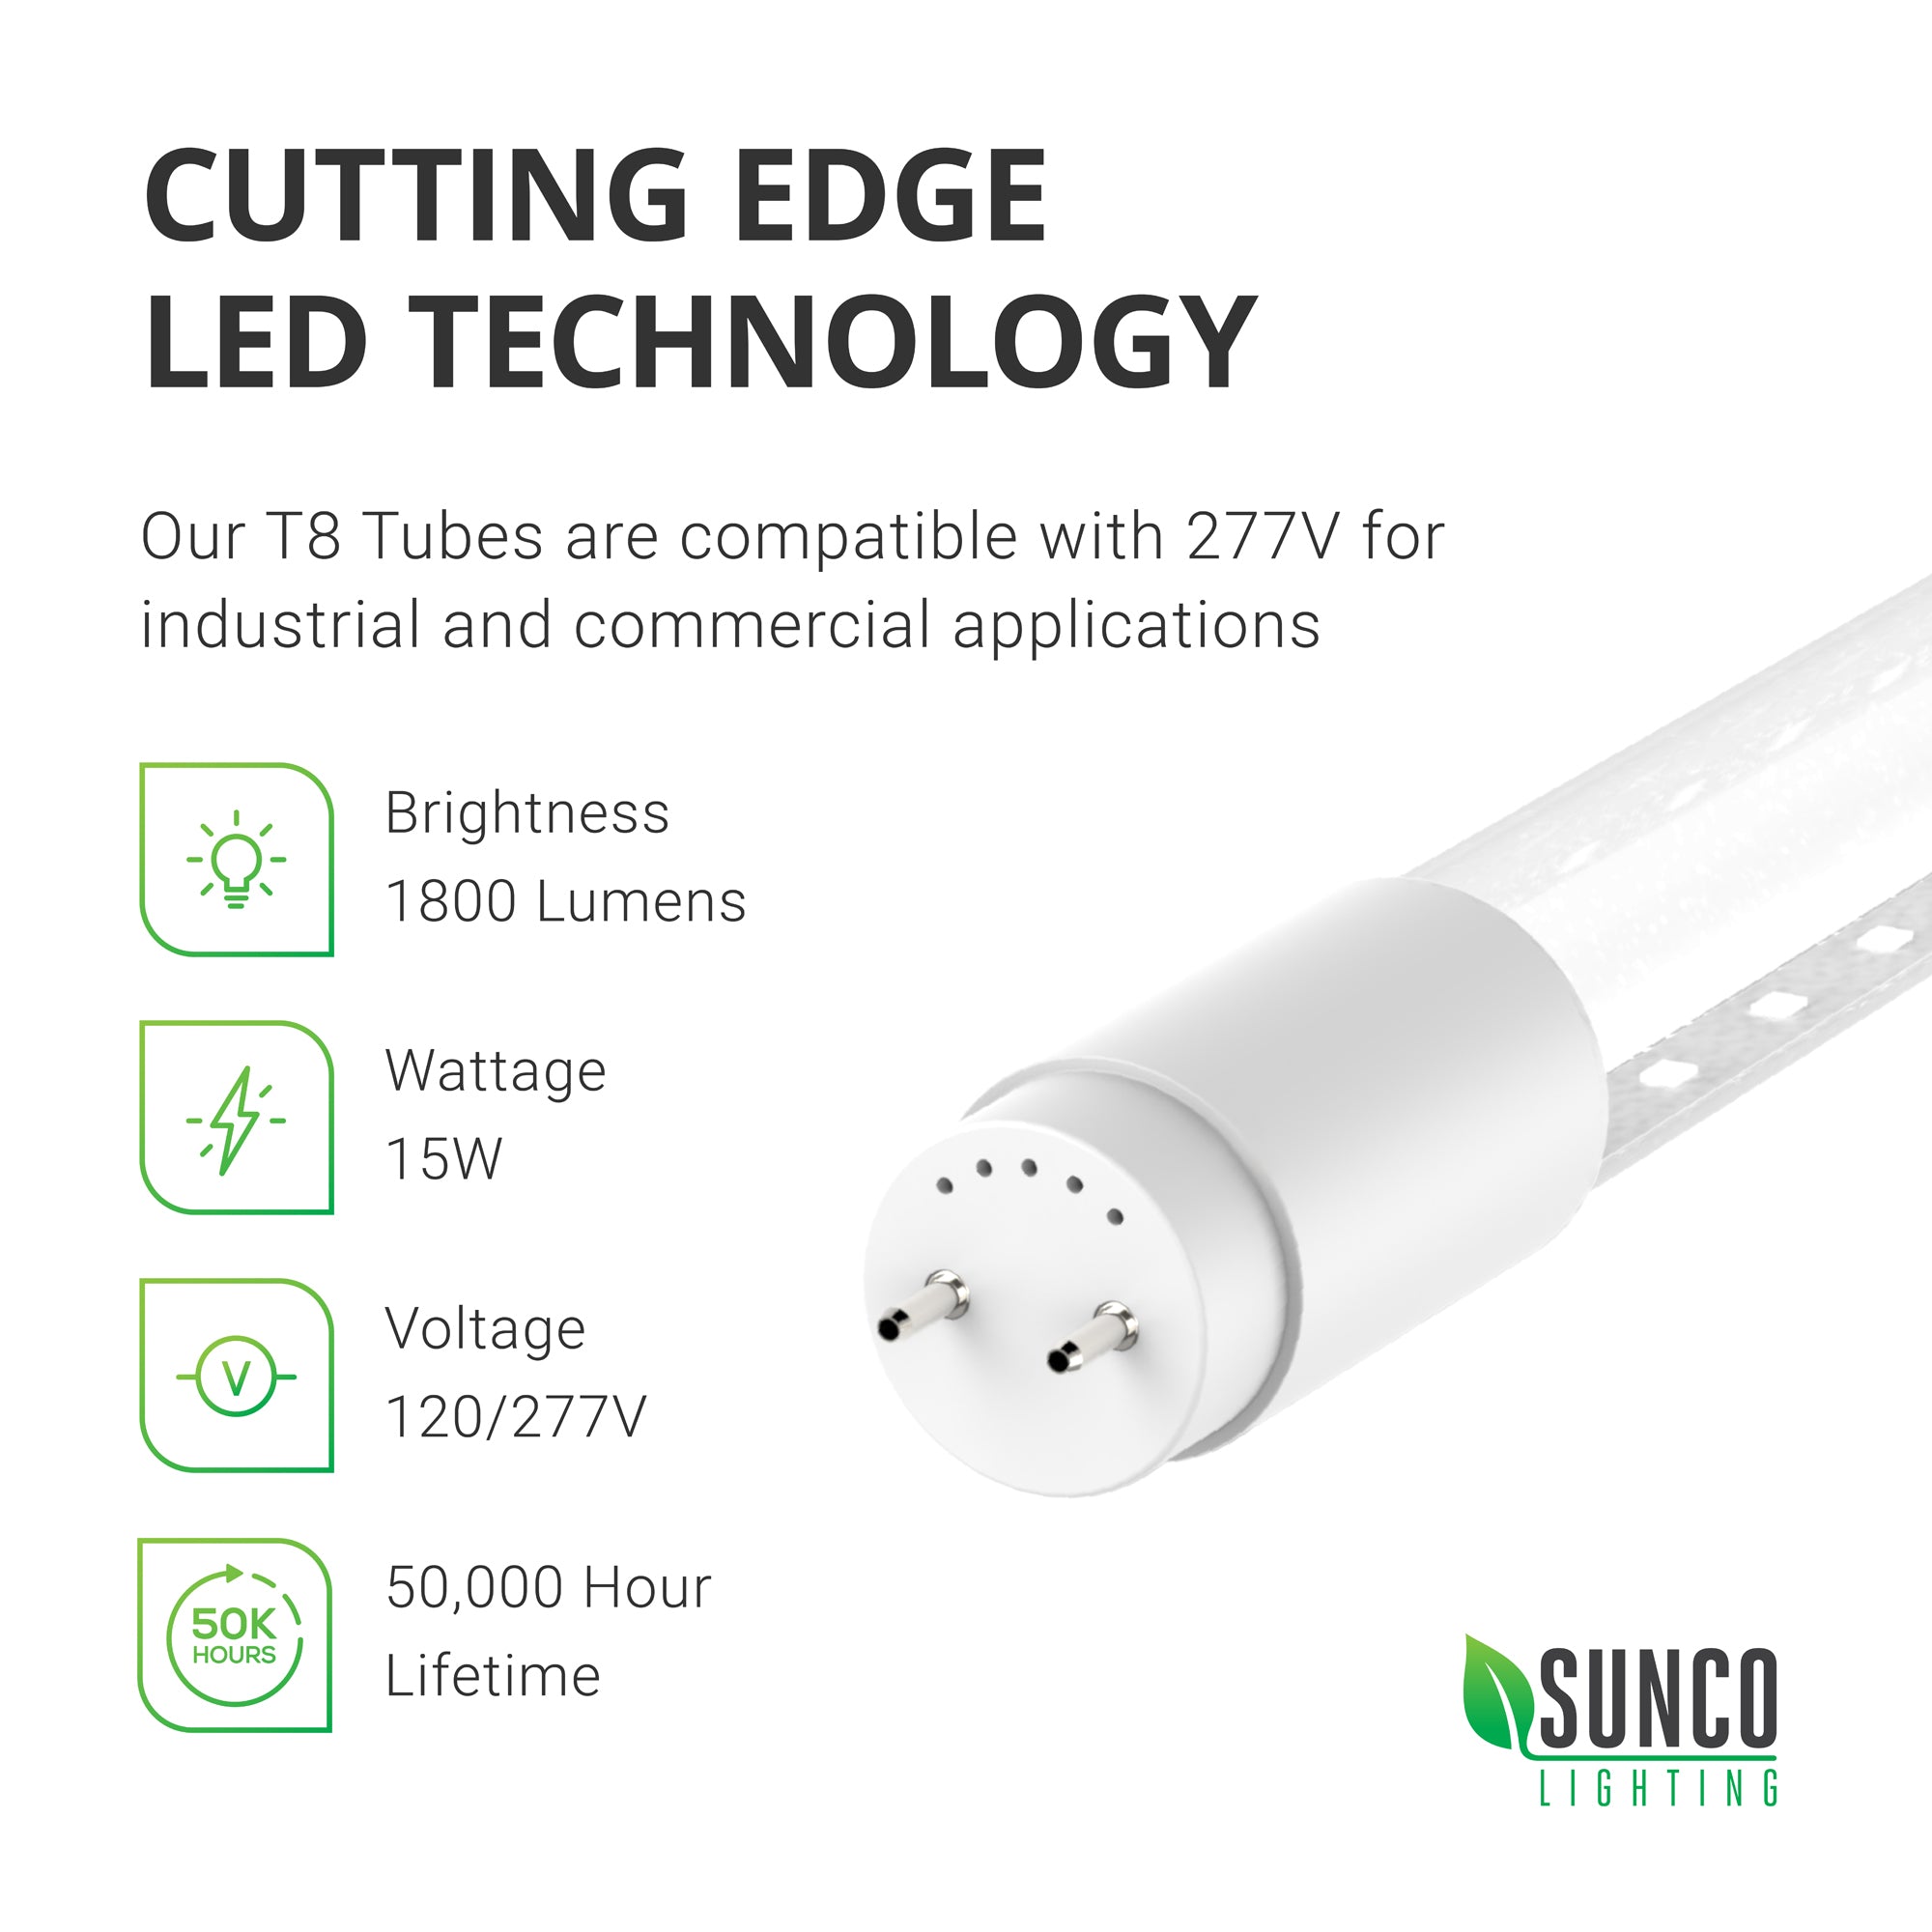 Cutting Edge LED Technology. Our T8 Tubes are compatible with 227V for industrial and commercial applications. This T8 LED Tube with clear cover features: brightness: 1800 lumens, Wattage: 15W, Equivalency: 32W, Voltage: 120/277V, and they last for a 50,000 hour lifetime. This LED T8 requires a ballast bypass and uses non-shunted tombstone for its single ended power (SEP). 